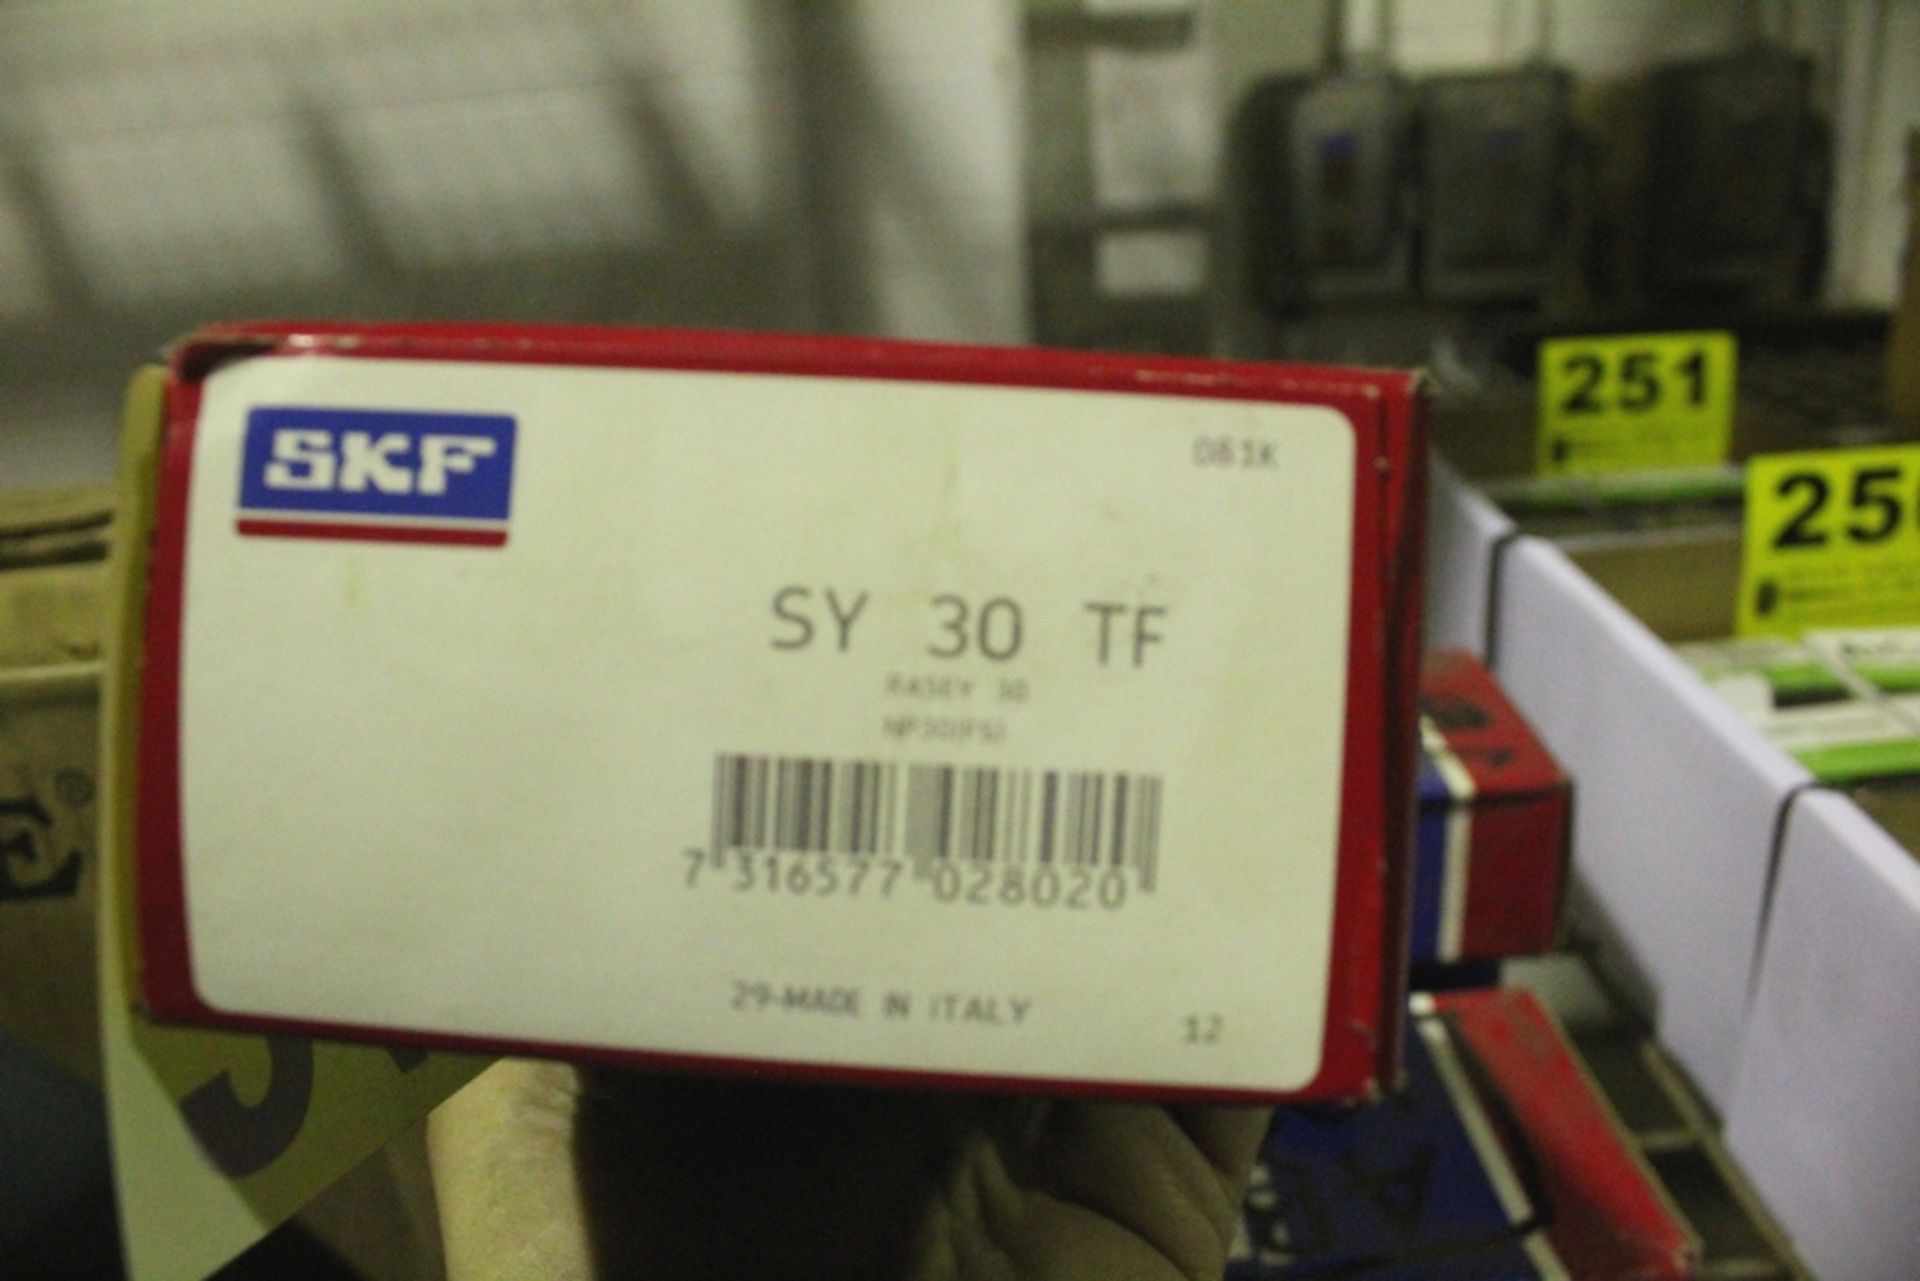 (4) SKF SY 30 TF PILLOW BLOCK BALL BEARING UNIT - TWO-BOLT BASE, 30 MM ID, ROUND BORE, CAST IRON, - Image 3 of 3